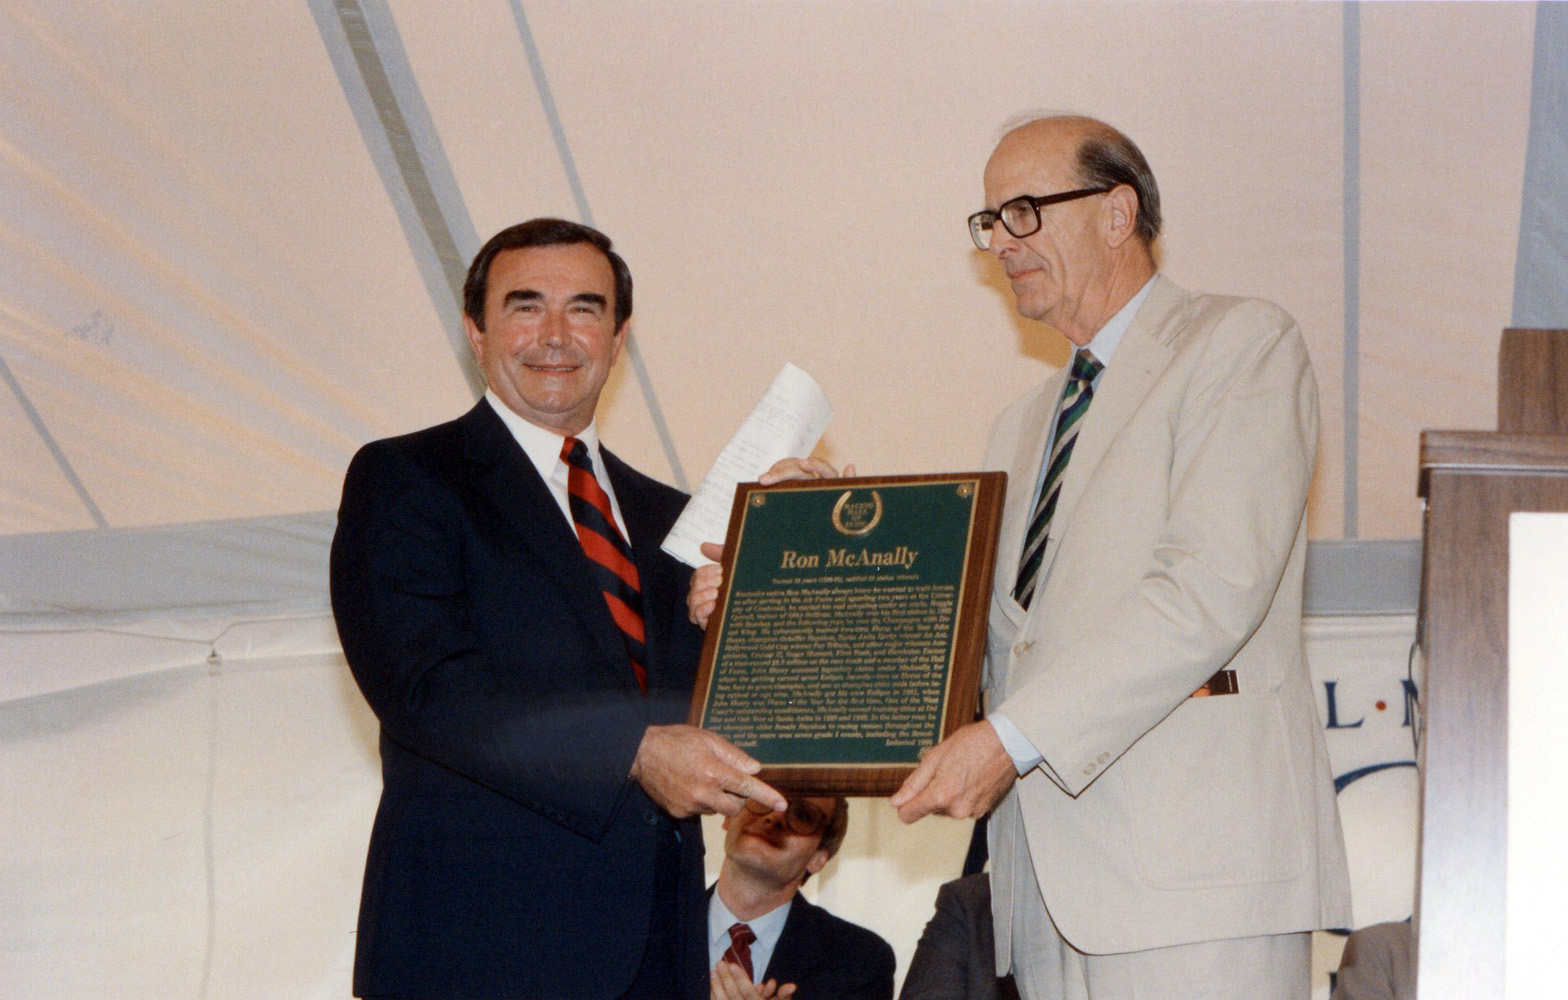 Ron McAnally at his Hall of Fame induction in 1990 (Barbara D. Livingston/Museum Collection)